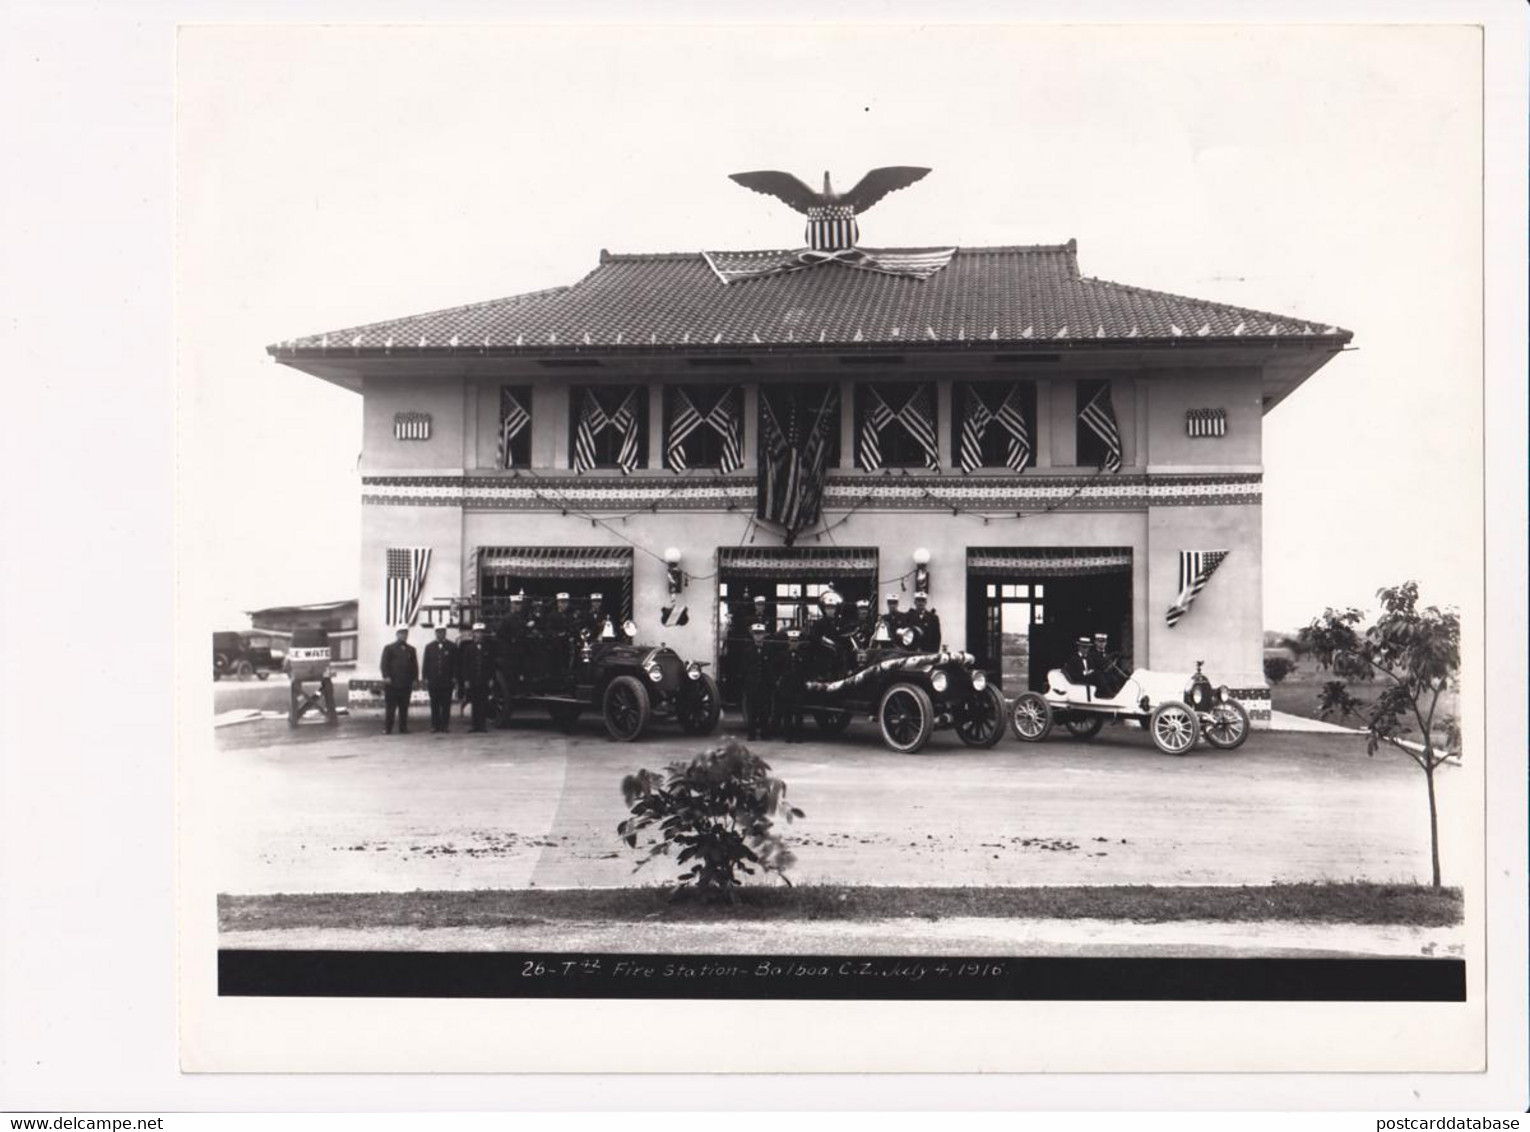 Fire Station - Balboa Canal Zone - Panama - Large Photo - & Fire Station, Old Cars - Profesiones